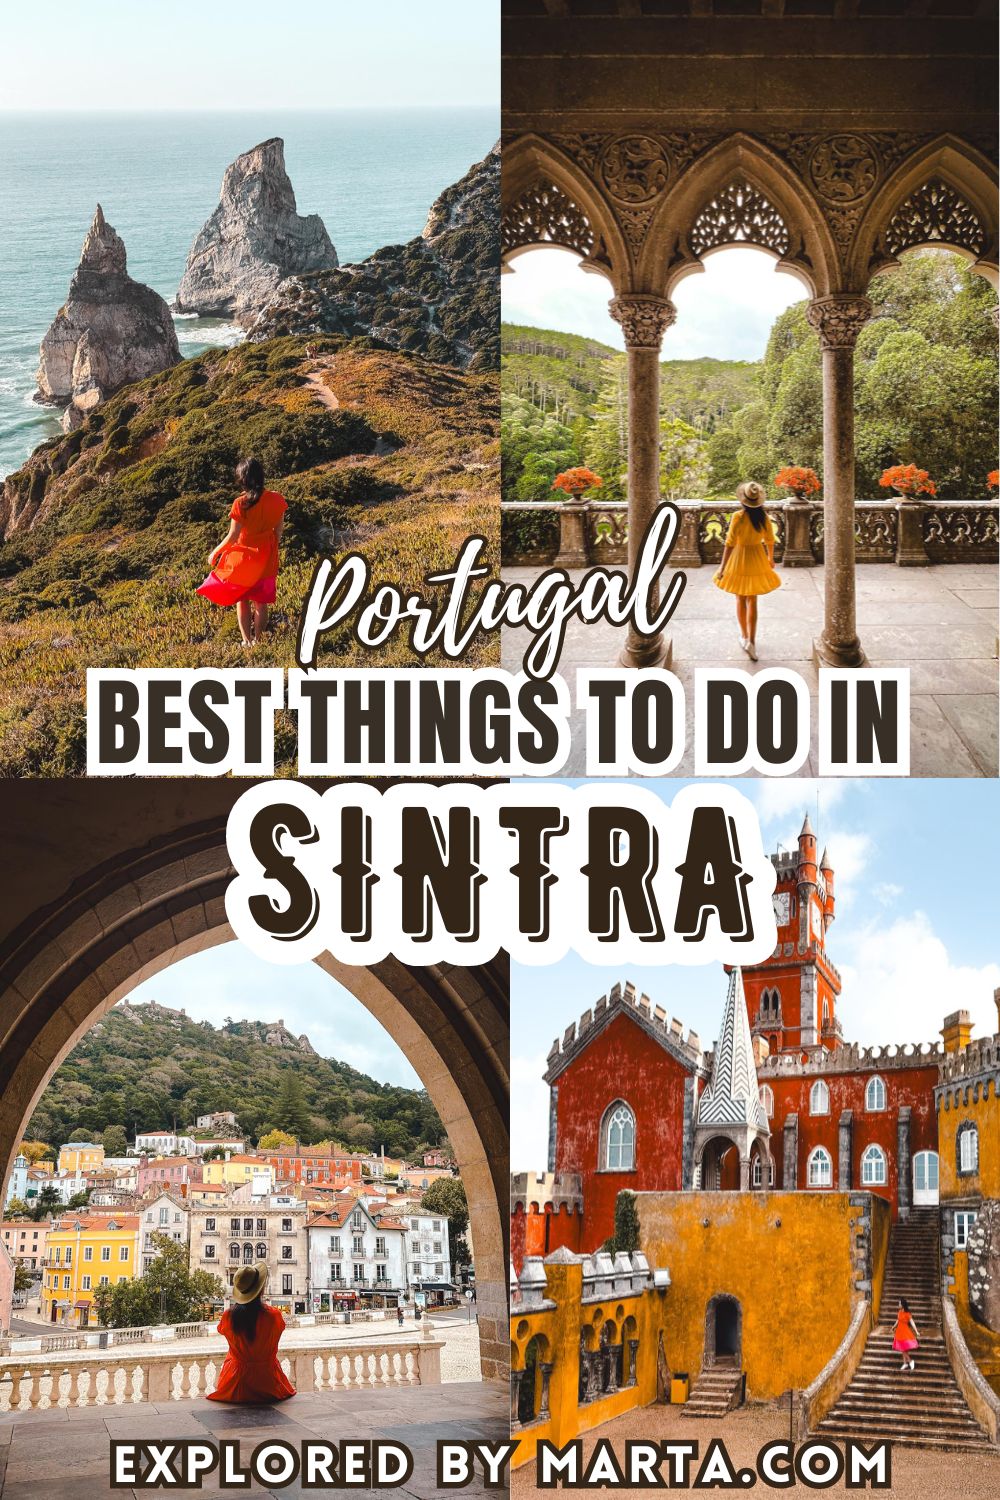 Best things to do in charming Sintra, Portugal